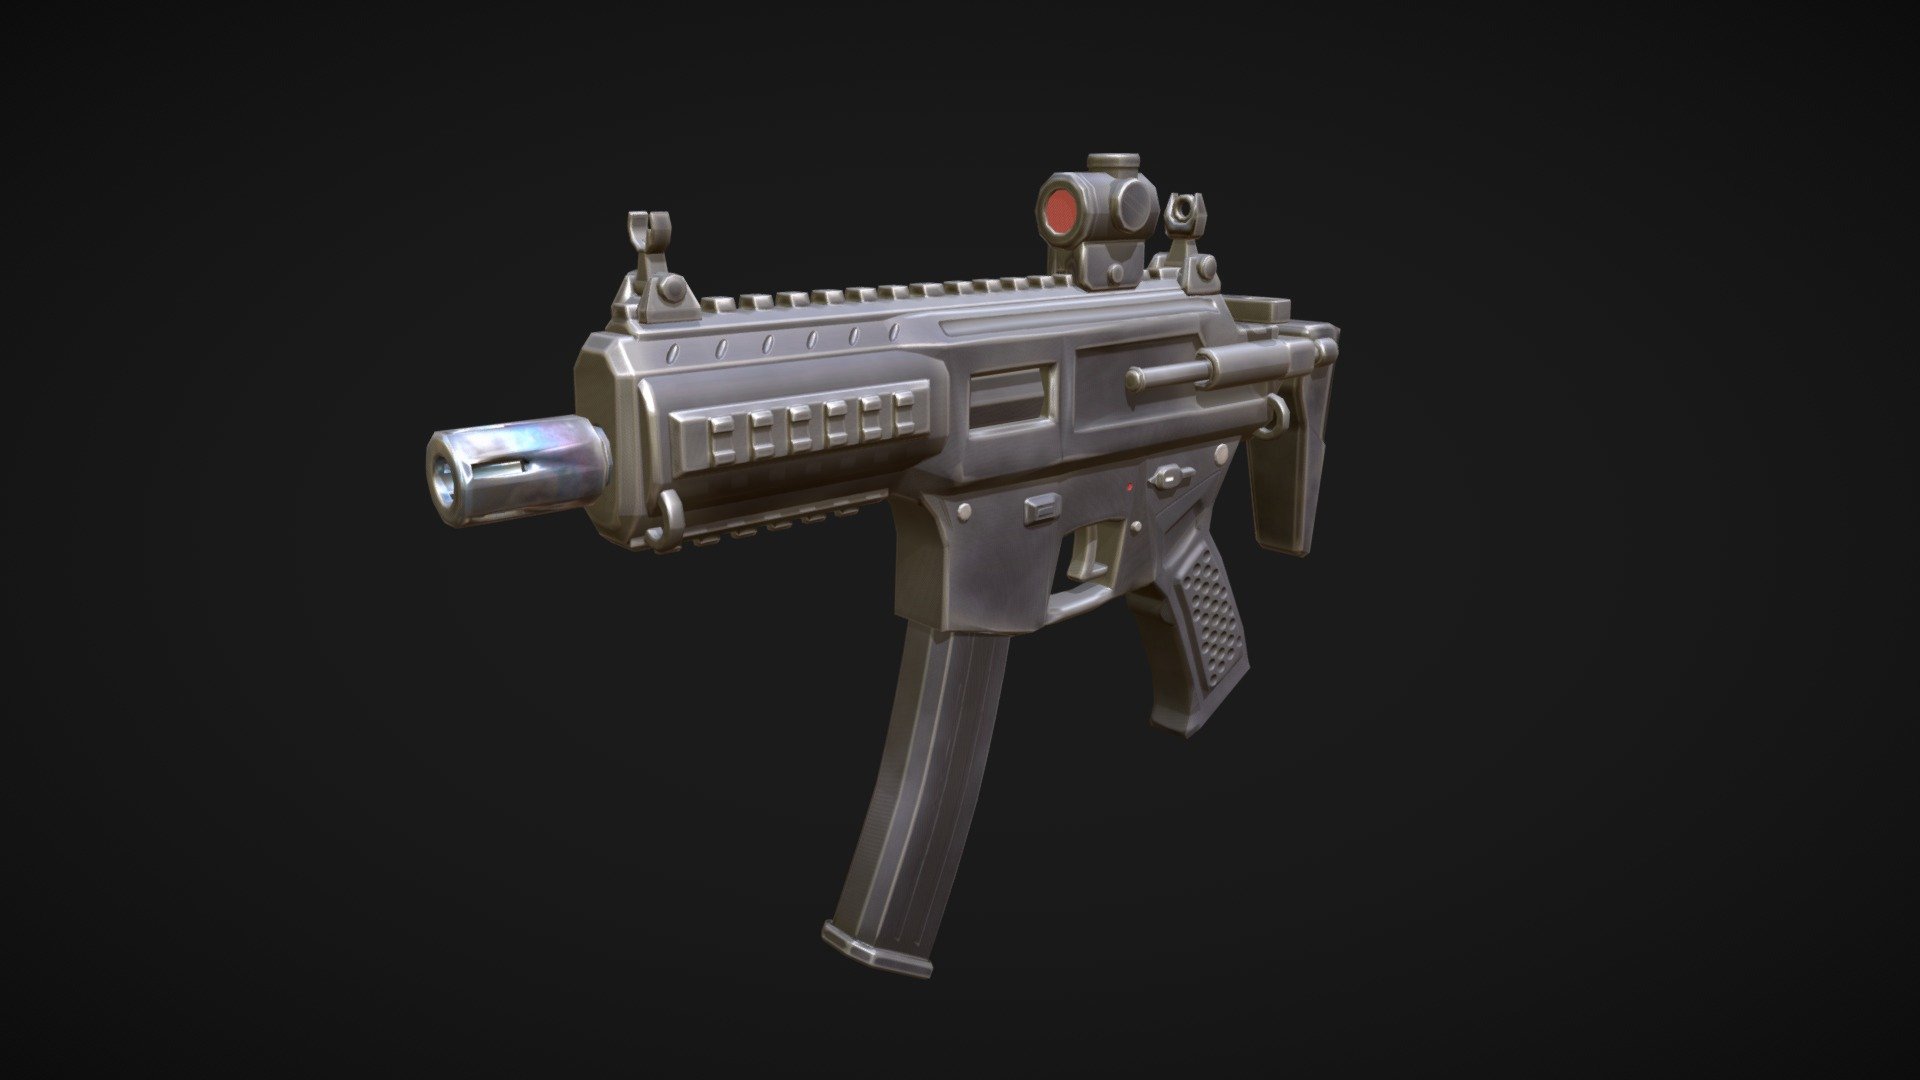 Brand new gun made in 20 hours. Textures stylized, inspired by Fortnite and Valorant. 
Hope you will like this one !
Don't forget to check out my artstation account, I will post more of these ! Link right here : https://www.artstation.com/manronega - AR PM1 - Submachine gun 9mm - Stylized - Download Free 3D model by romanagenor 3d model